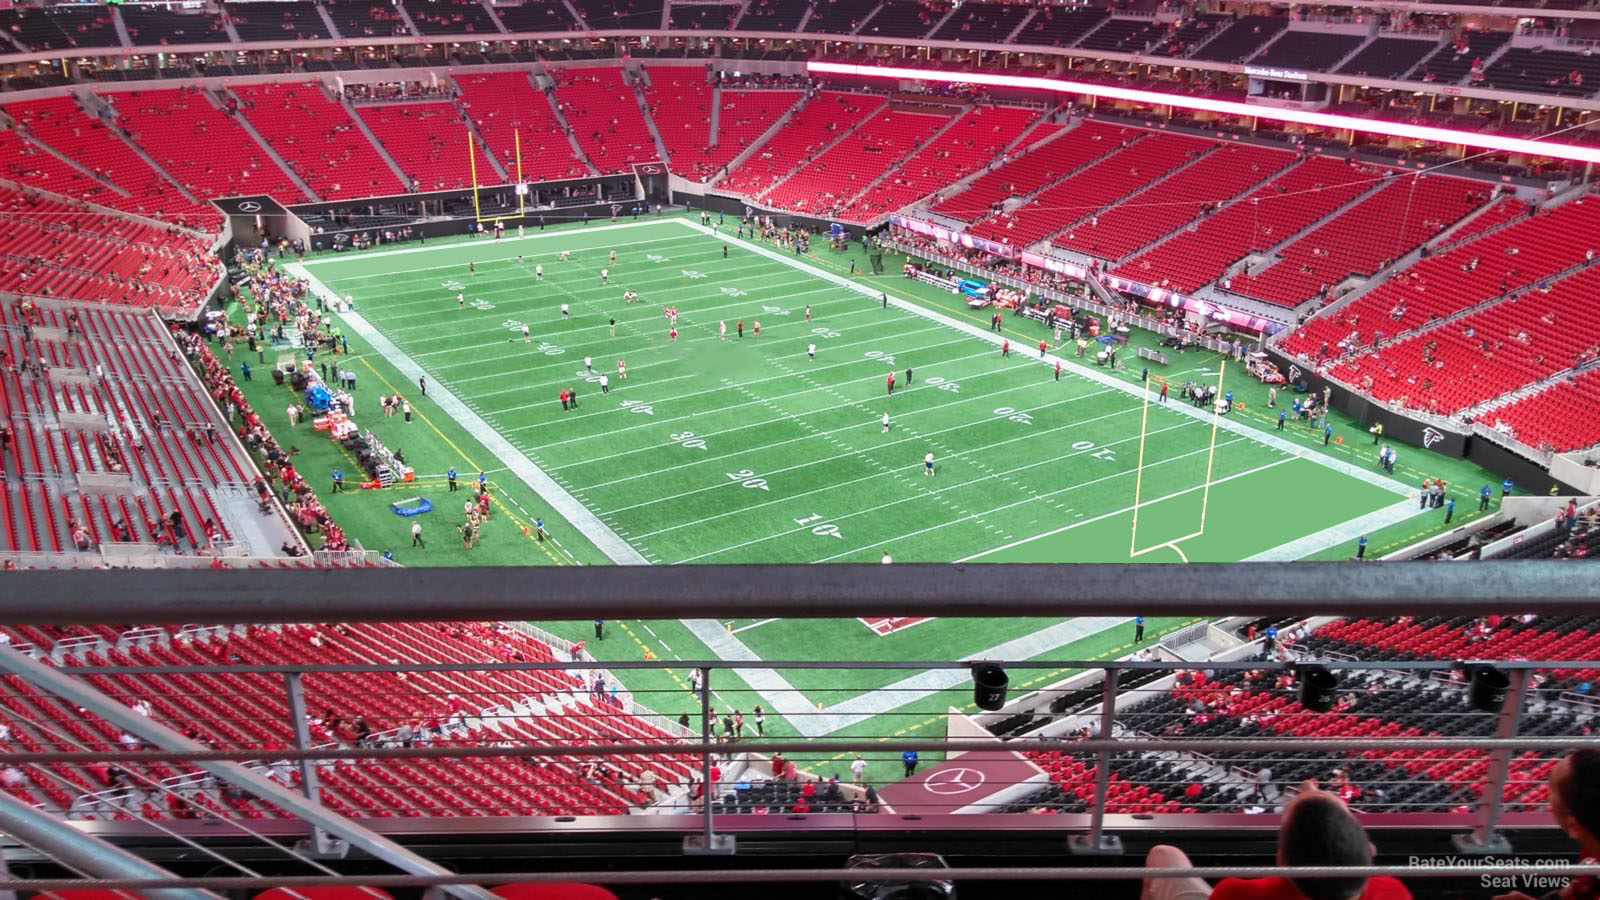 section 302, row 4 seat view  for football - mercedes-benz stadium